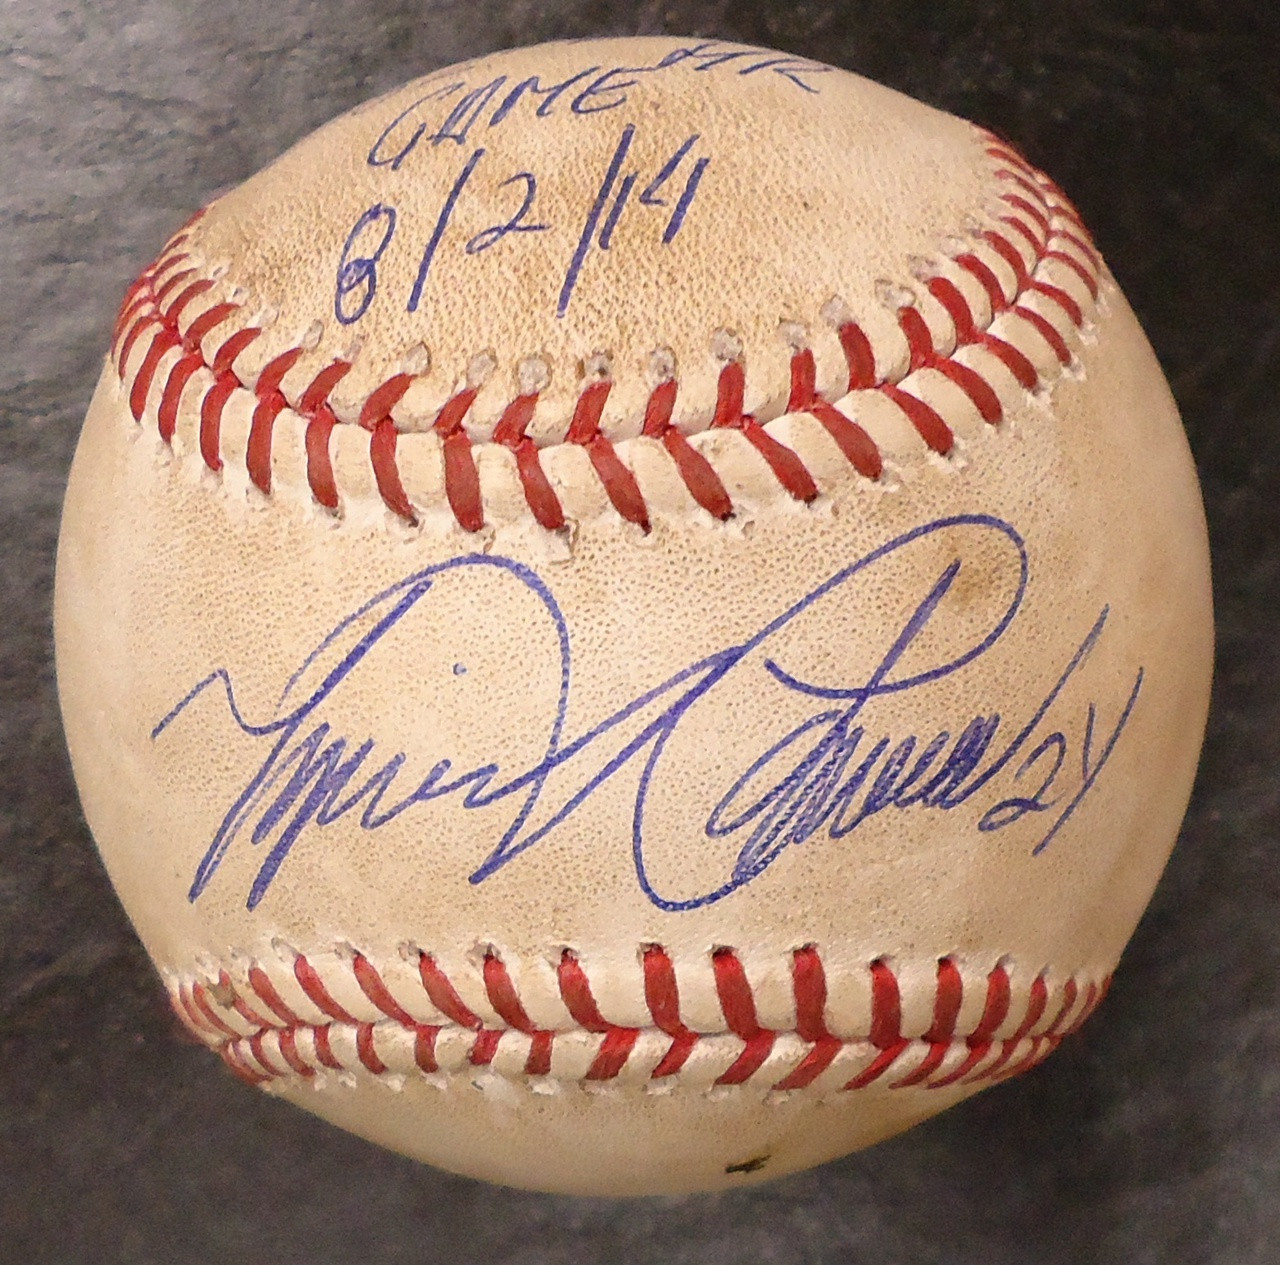 Miguel Cabrera Game Used 382nd Home Run Game Baseball #1 - Autographed and  Inscribed - Detroit City Sports